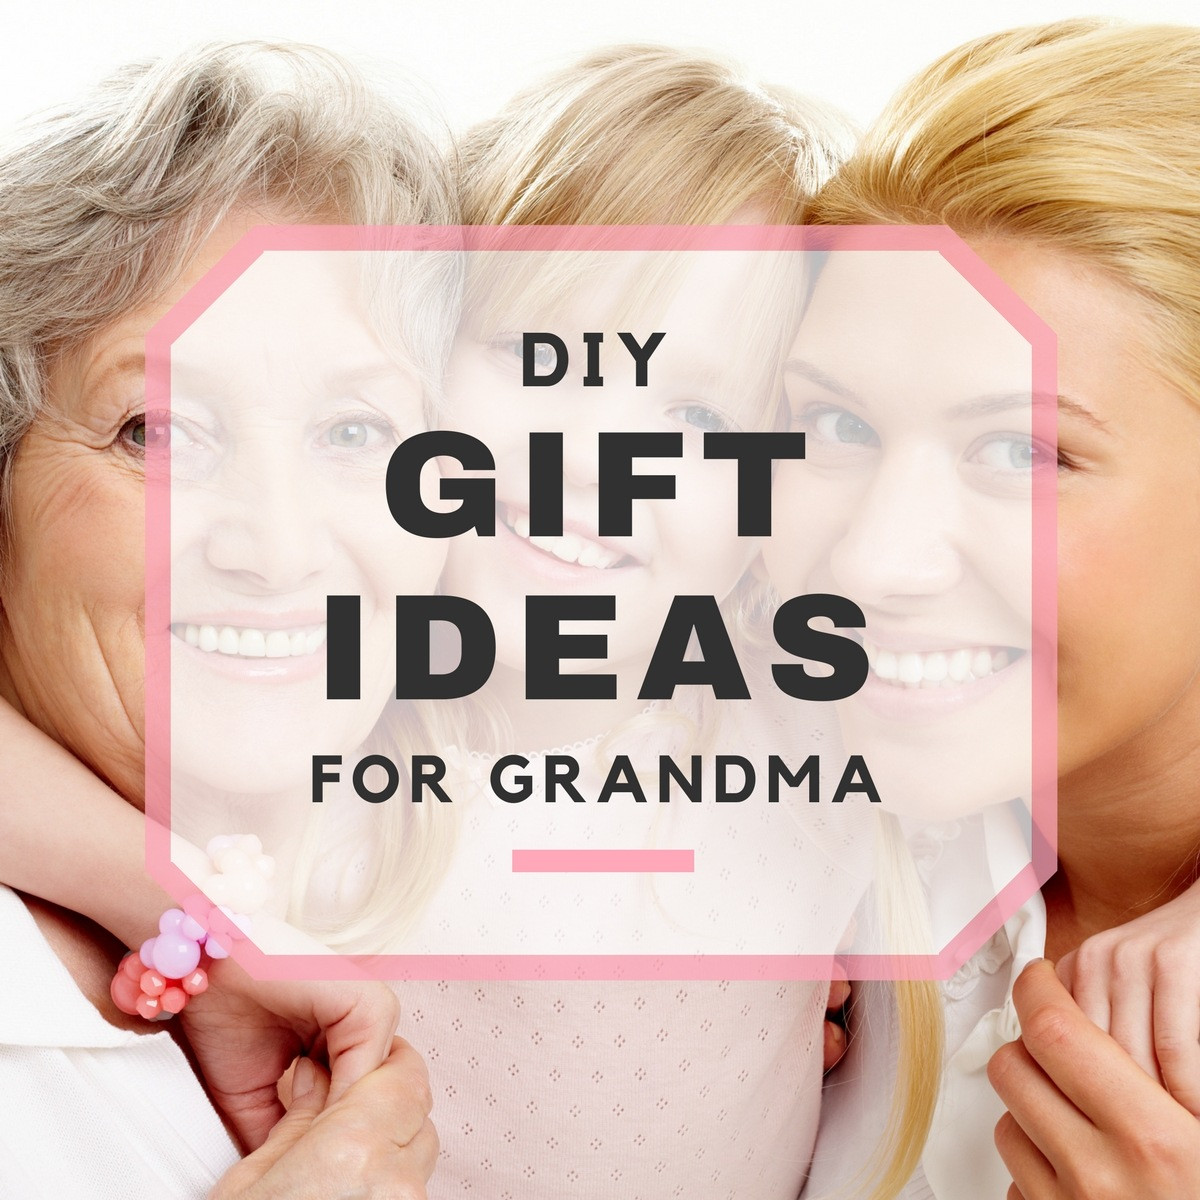 Gift Ideas For A Grandmother
 DIY Gift Ideas for Grandma